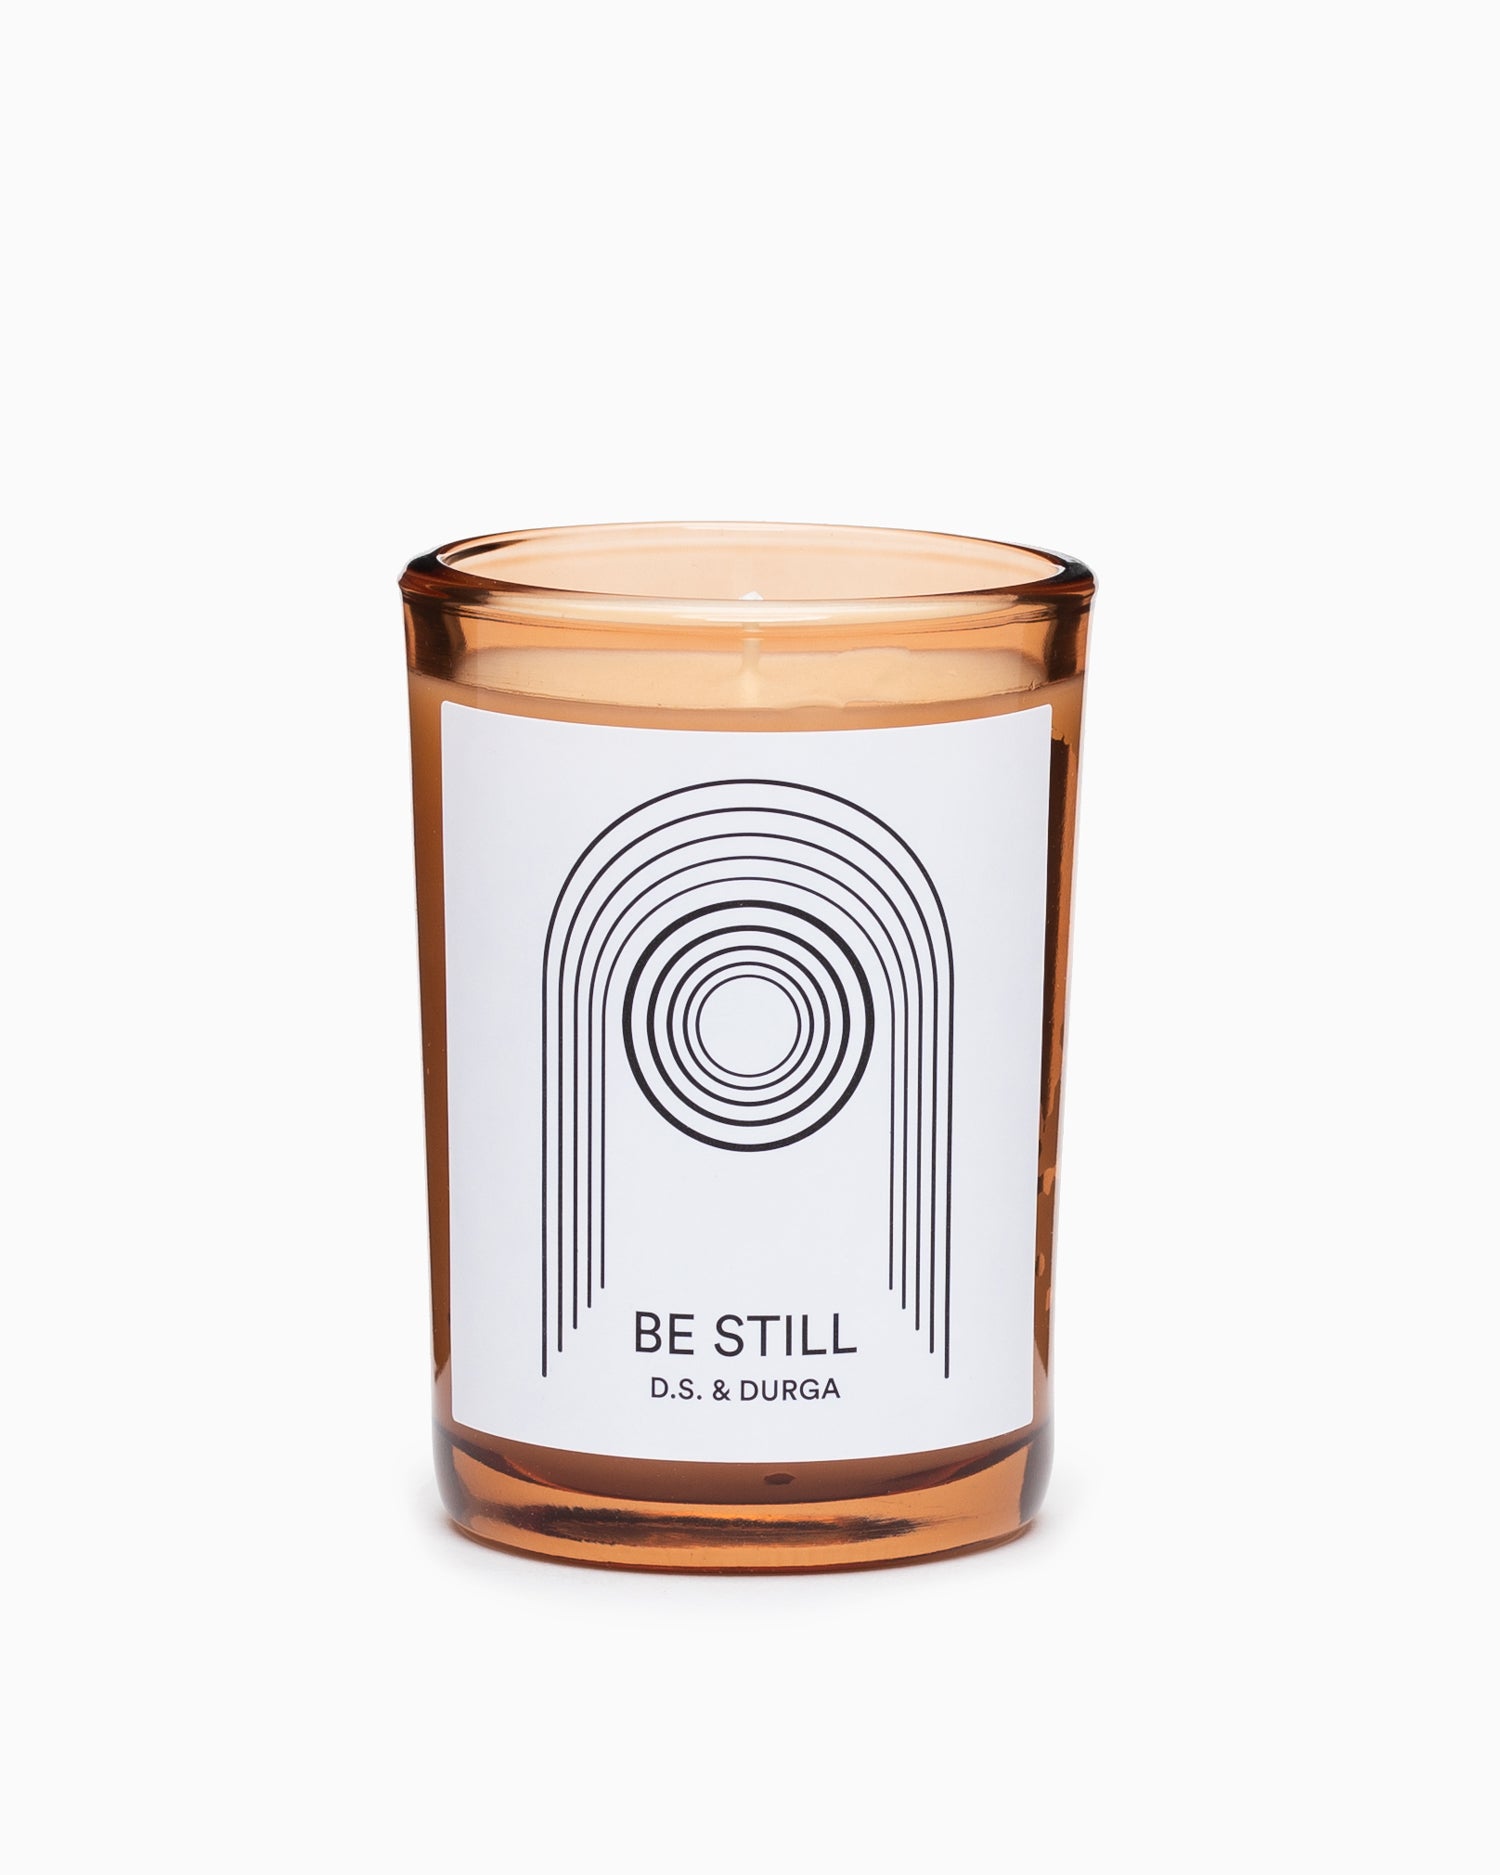 Be Still Candle - D.S. & Durga